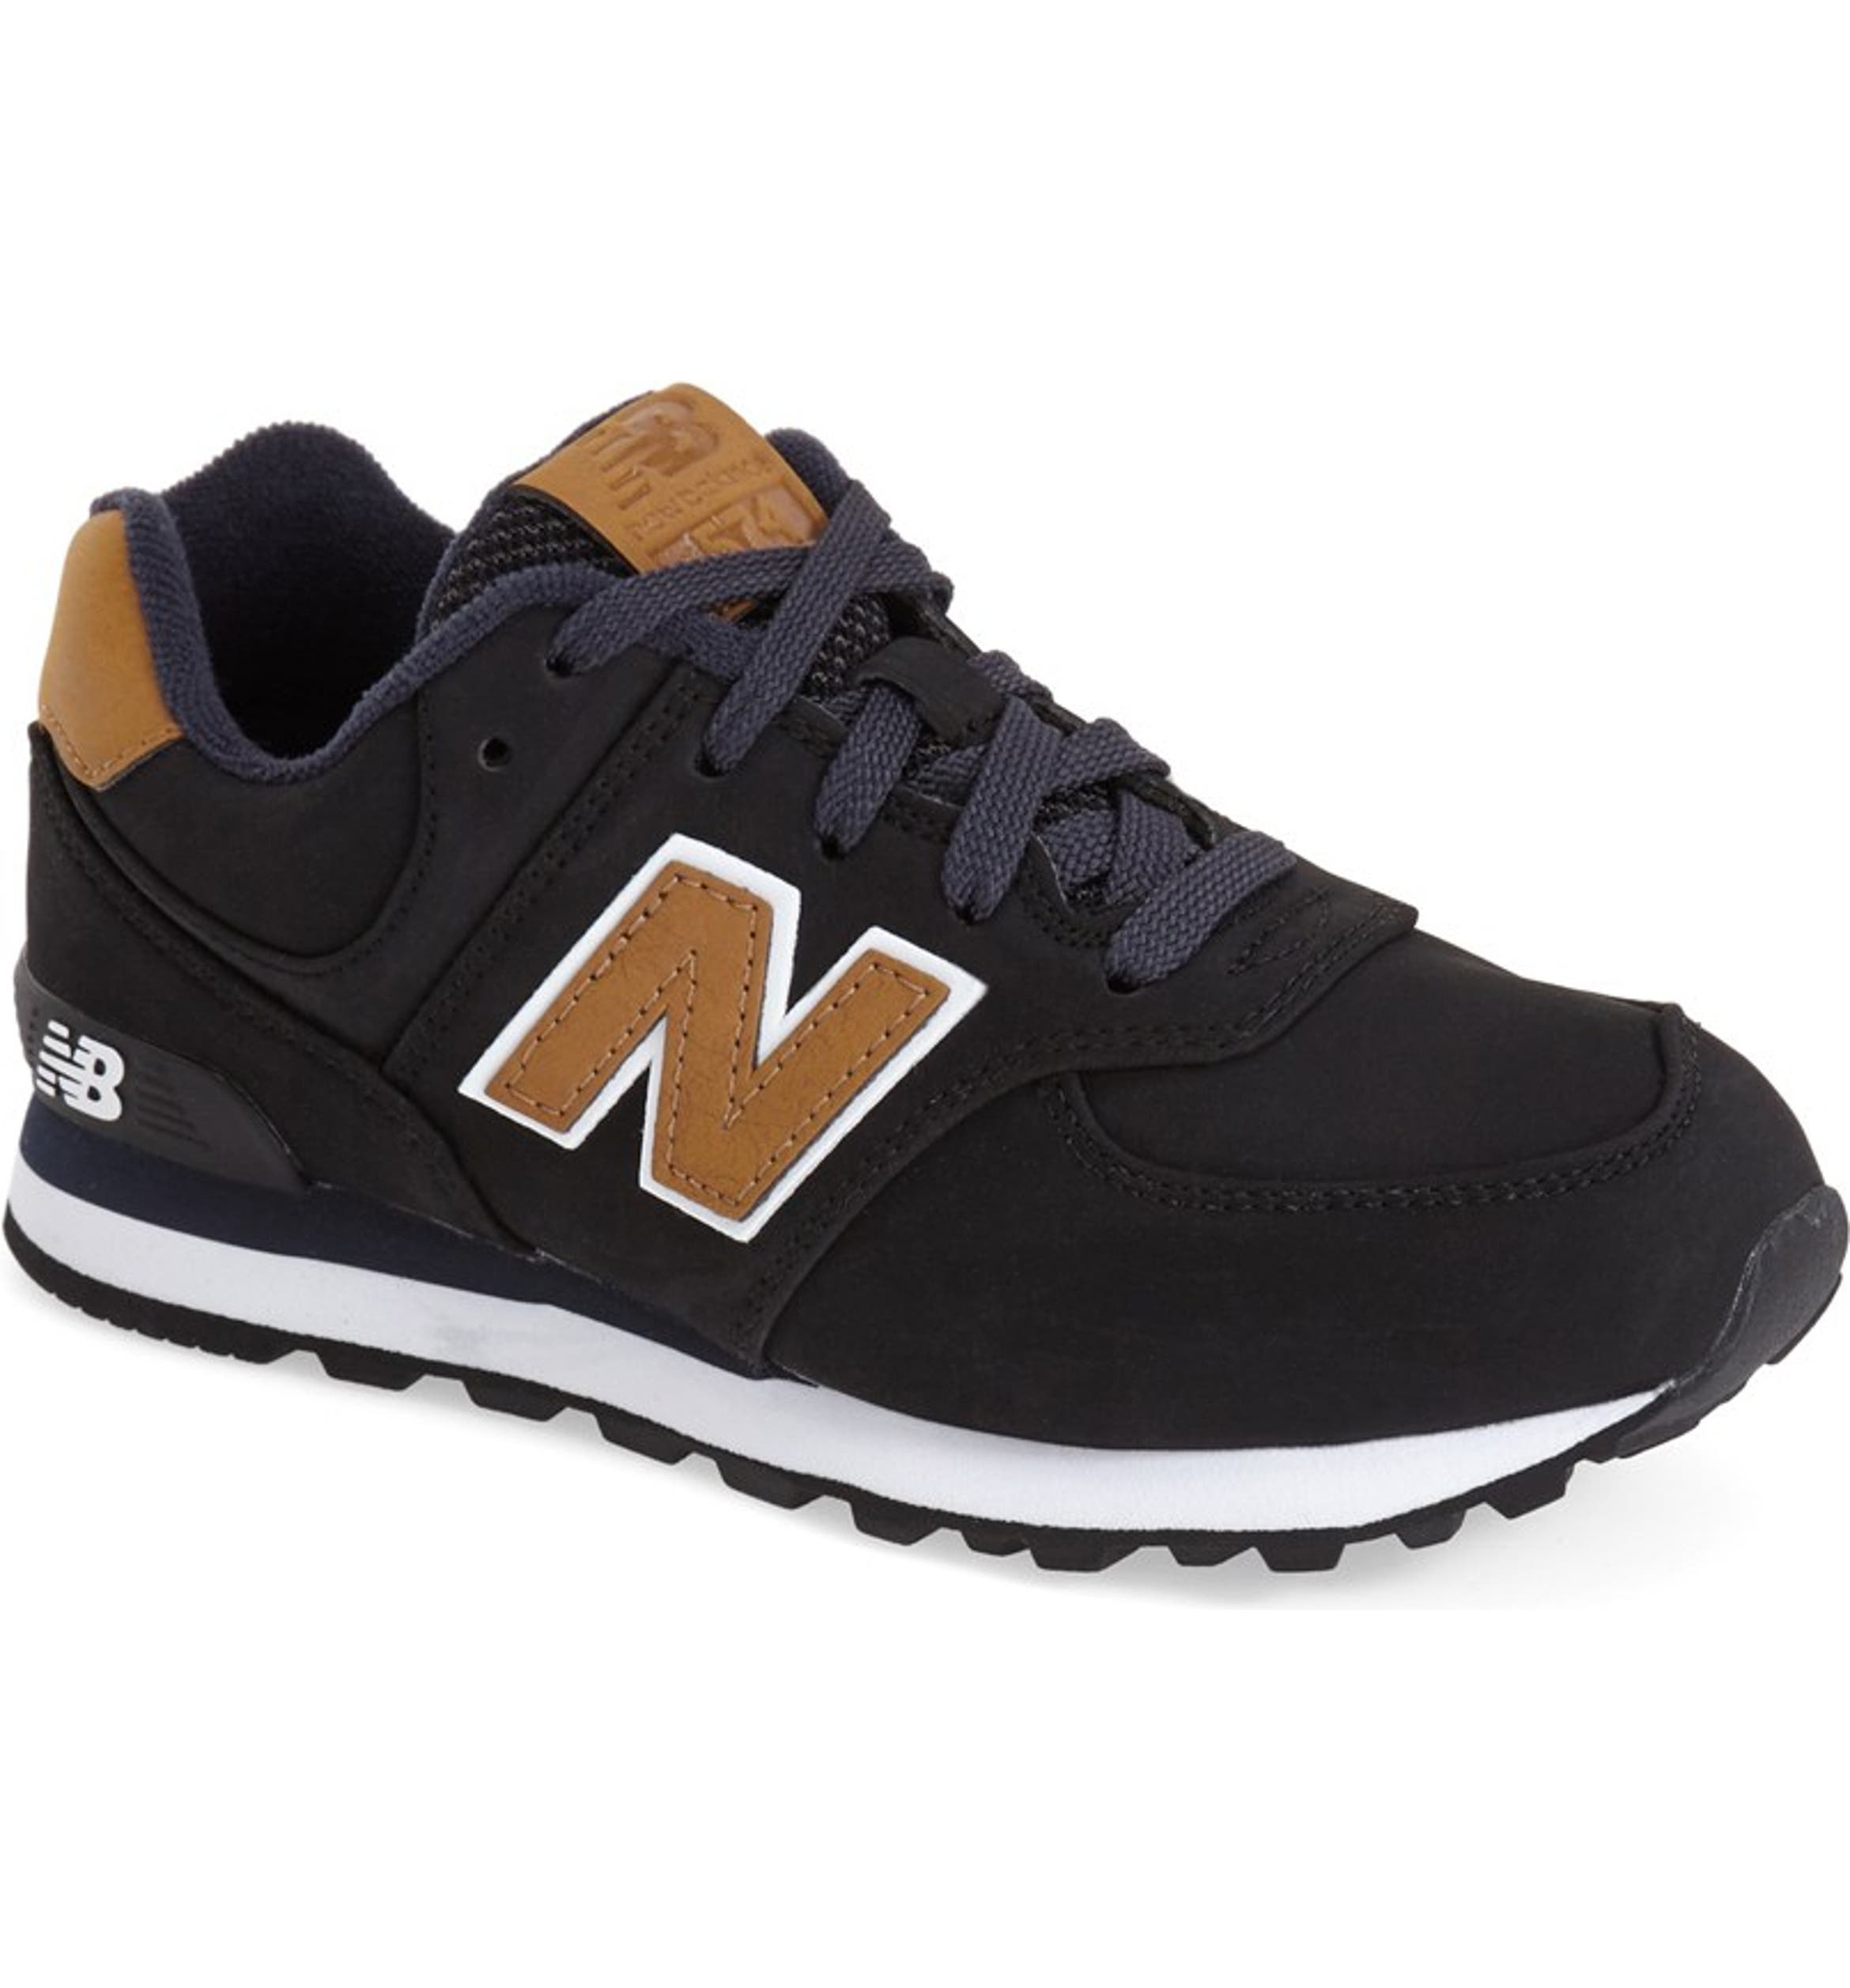 New Balance '574 - Lux Collection' Sneaker (Baby, Walker, Toddler ...